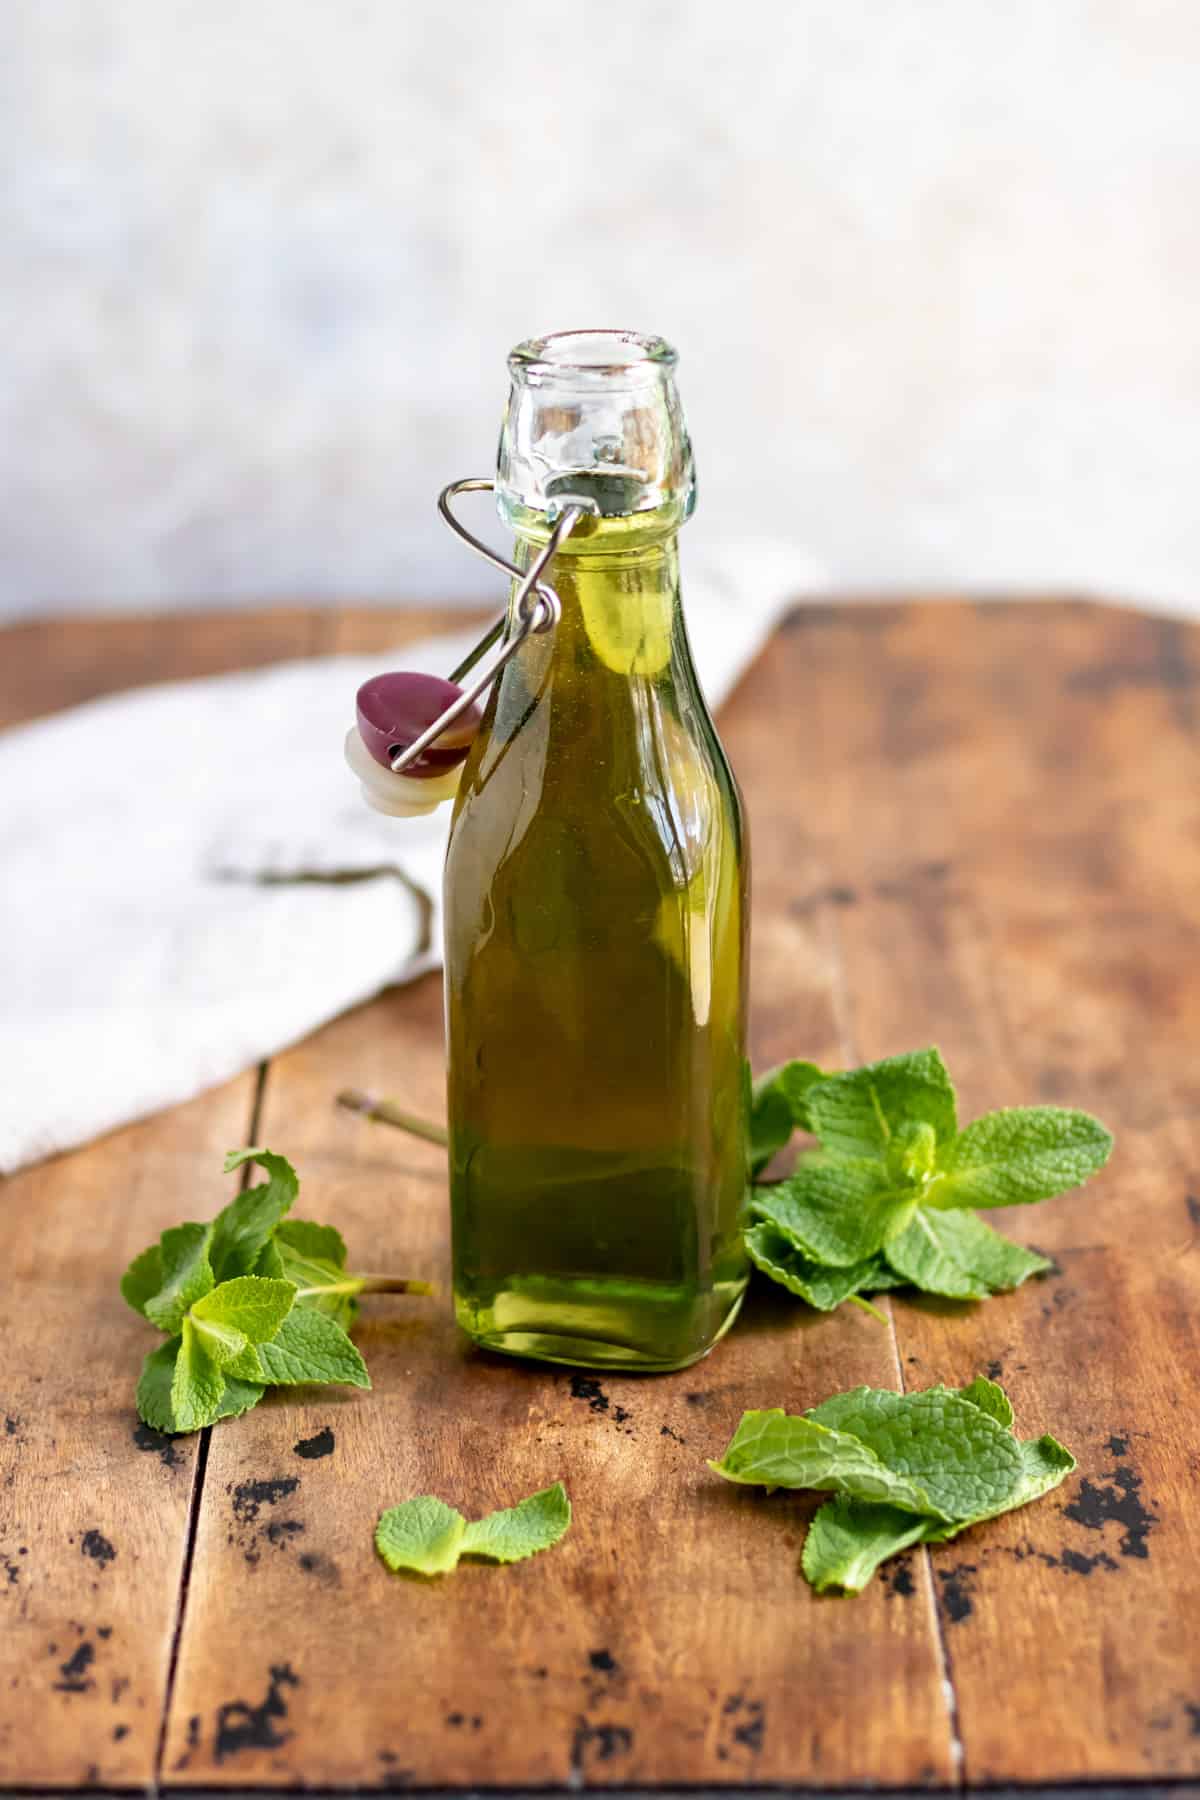 Wooden table with a bottle of syrup and sprigs of fresh mint.